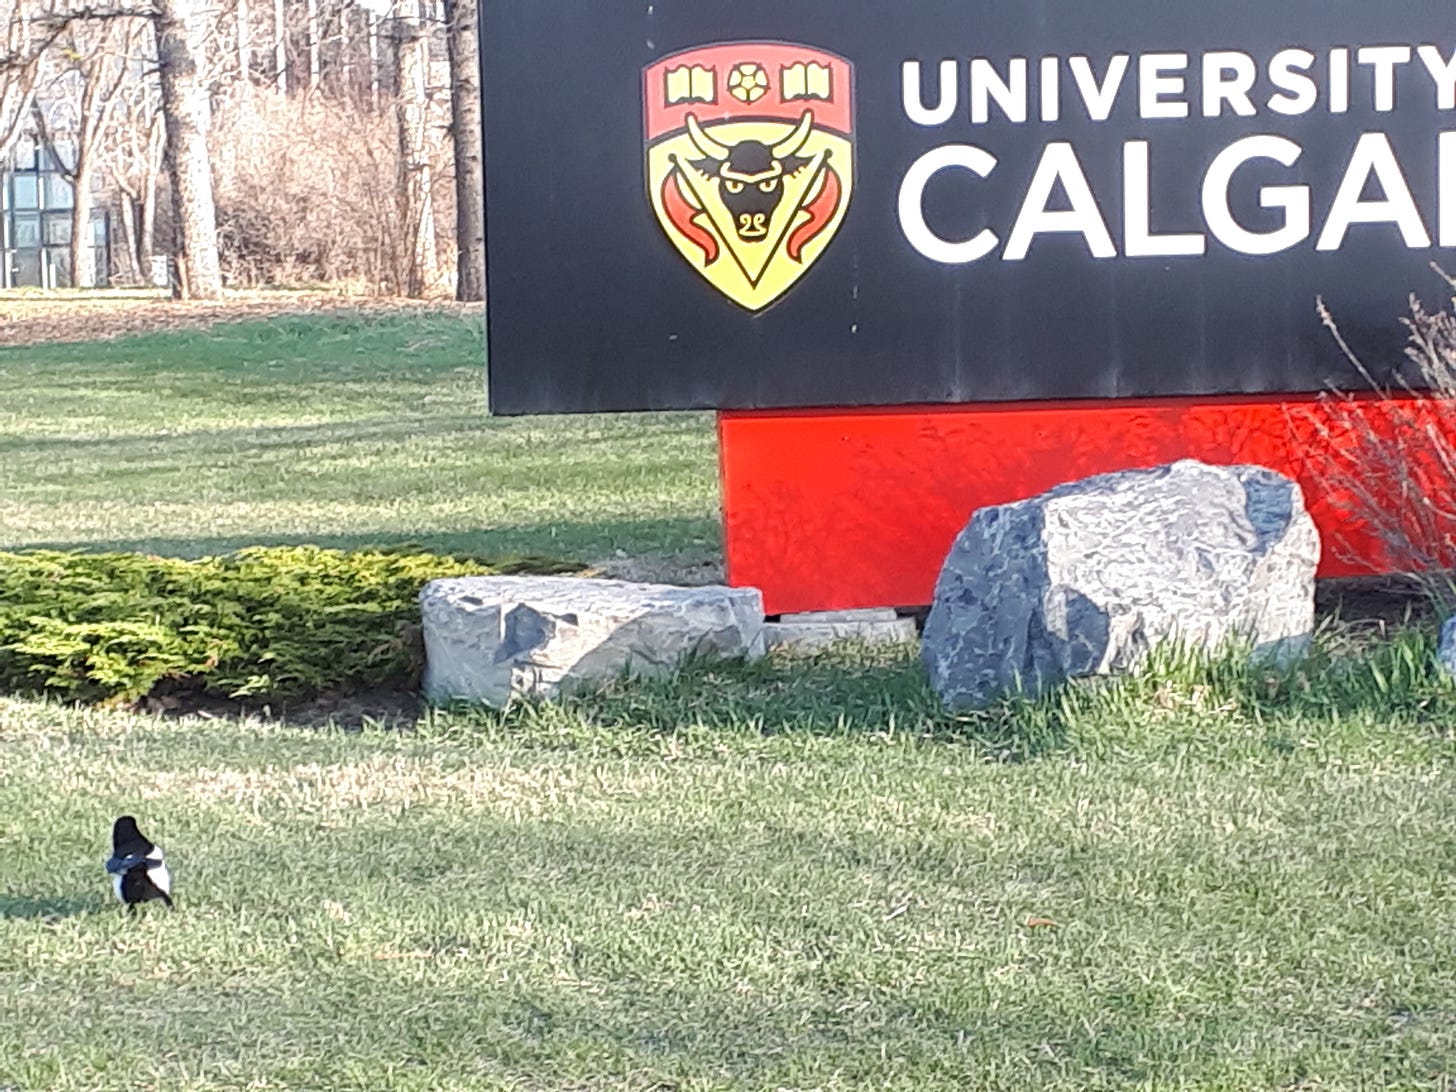 University of Calgary sign amongst grass and rocks. A small black and white bird can be seen in left foreground.